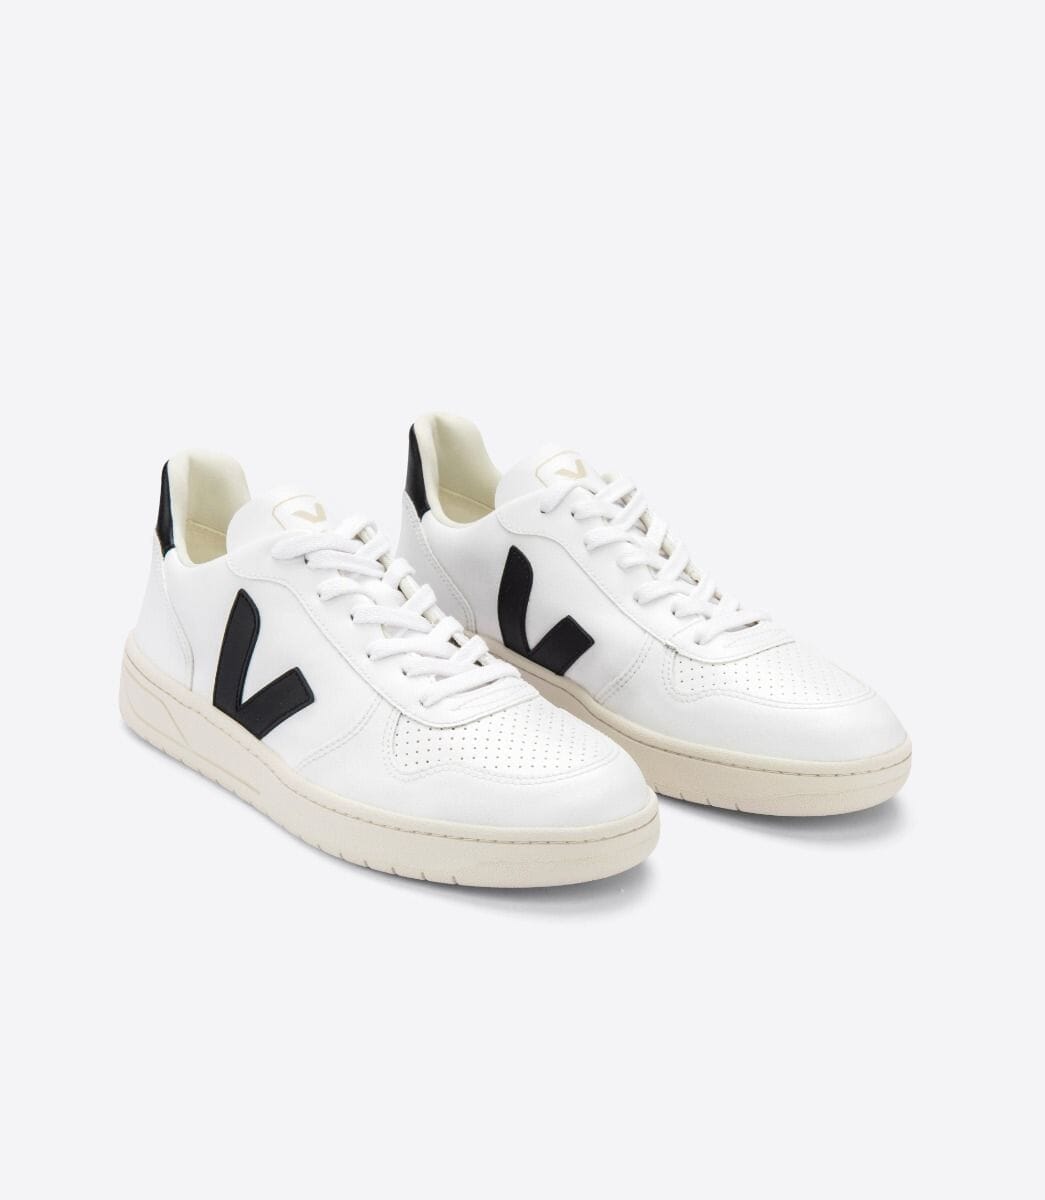 Veja M's V-10 CWL - Cotton Worked as Leather White Black Shoes